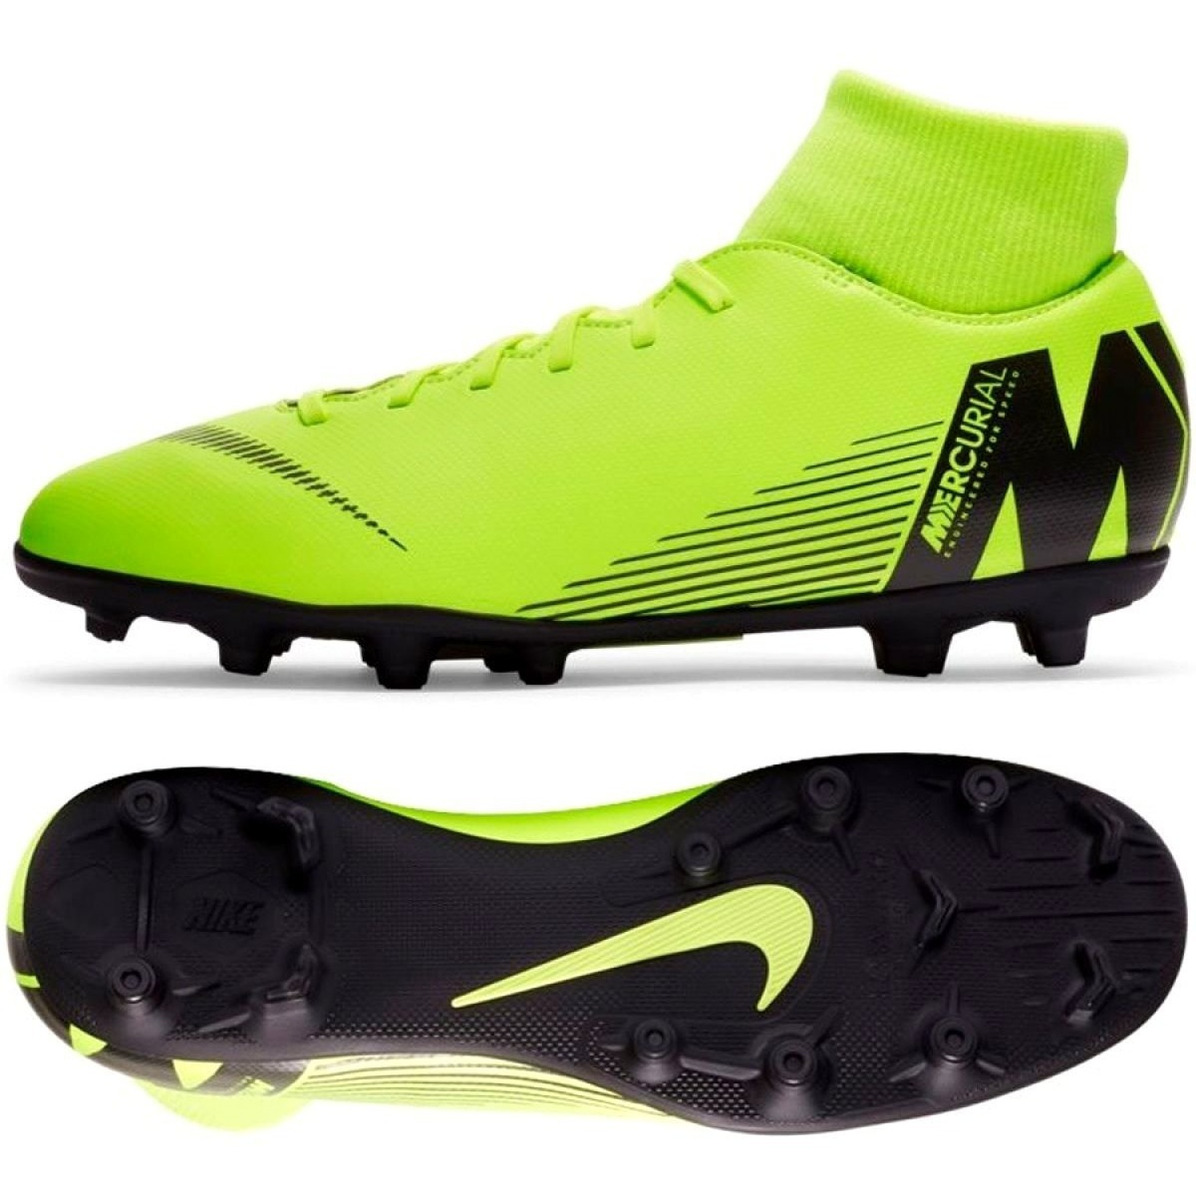 Botines Futbol 11 Mercadolibre, Buy Now, Clearance, 52% OFF, picotronic.ch